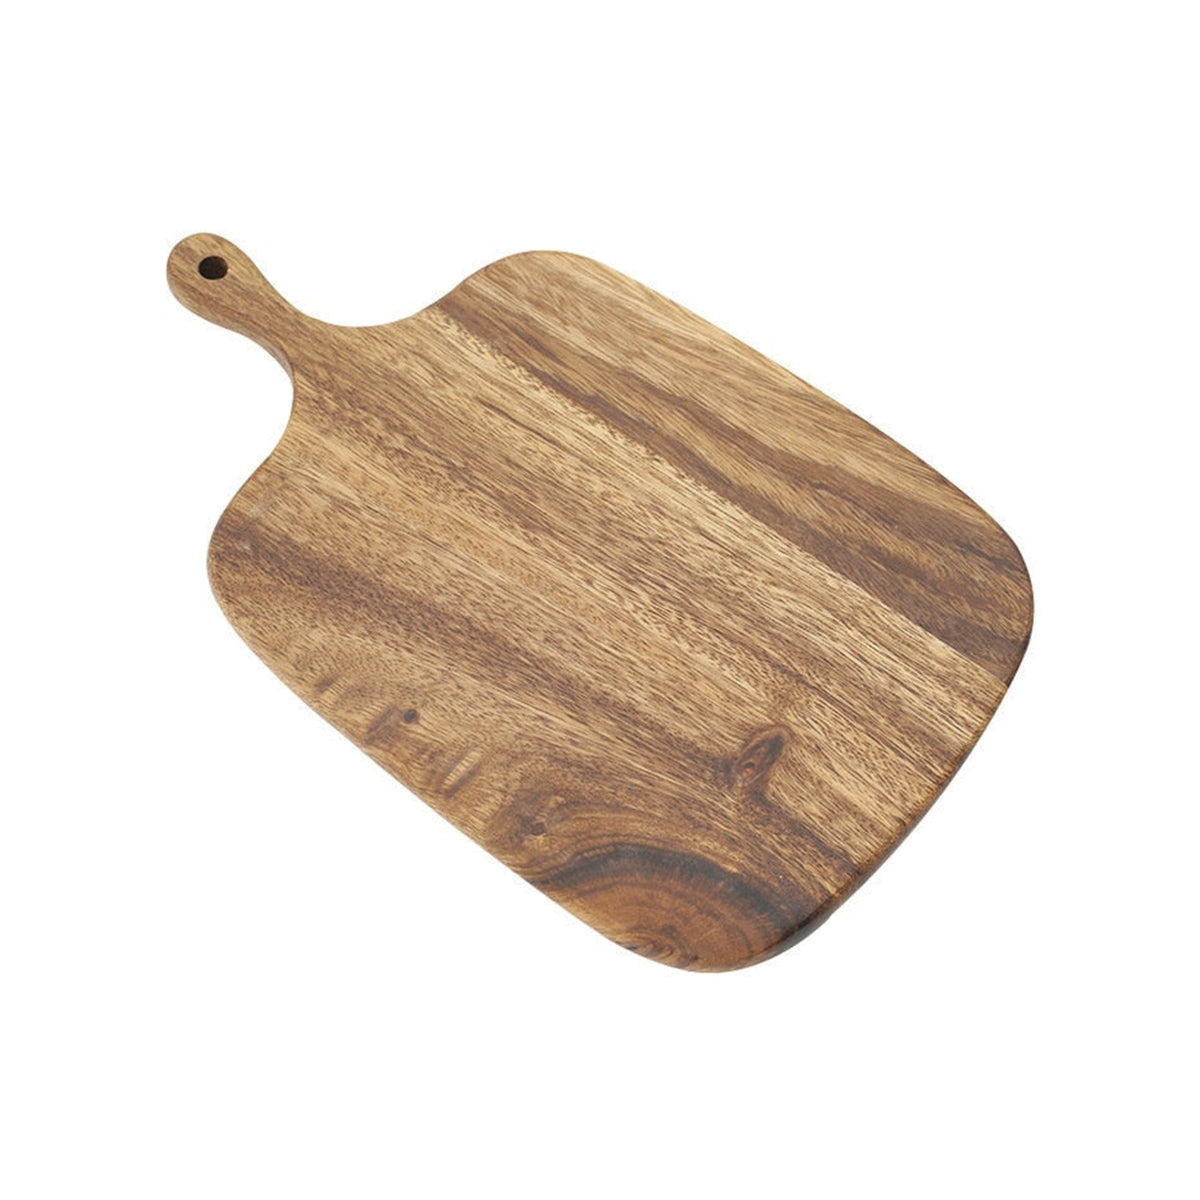 Wooden Cutting Board With Handle